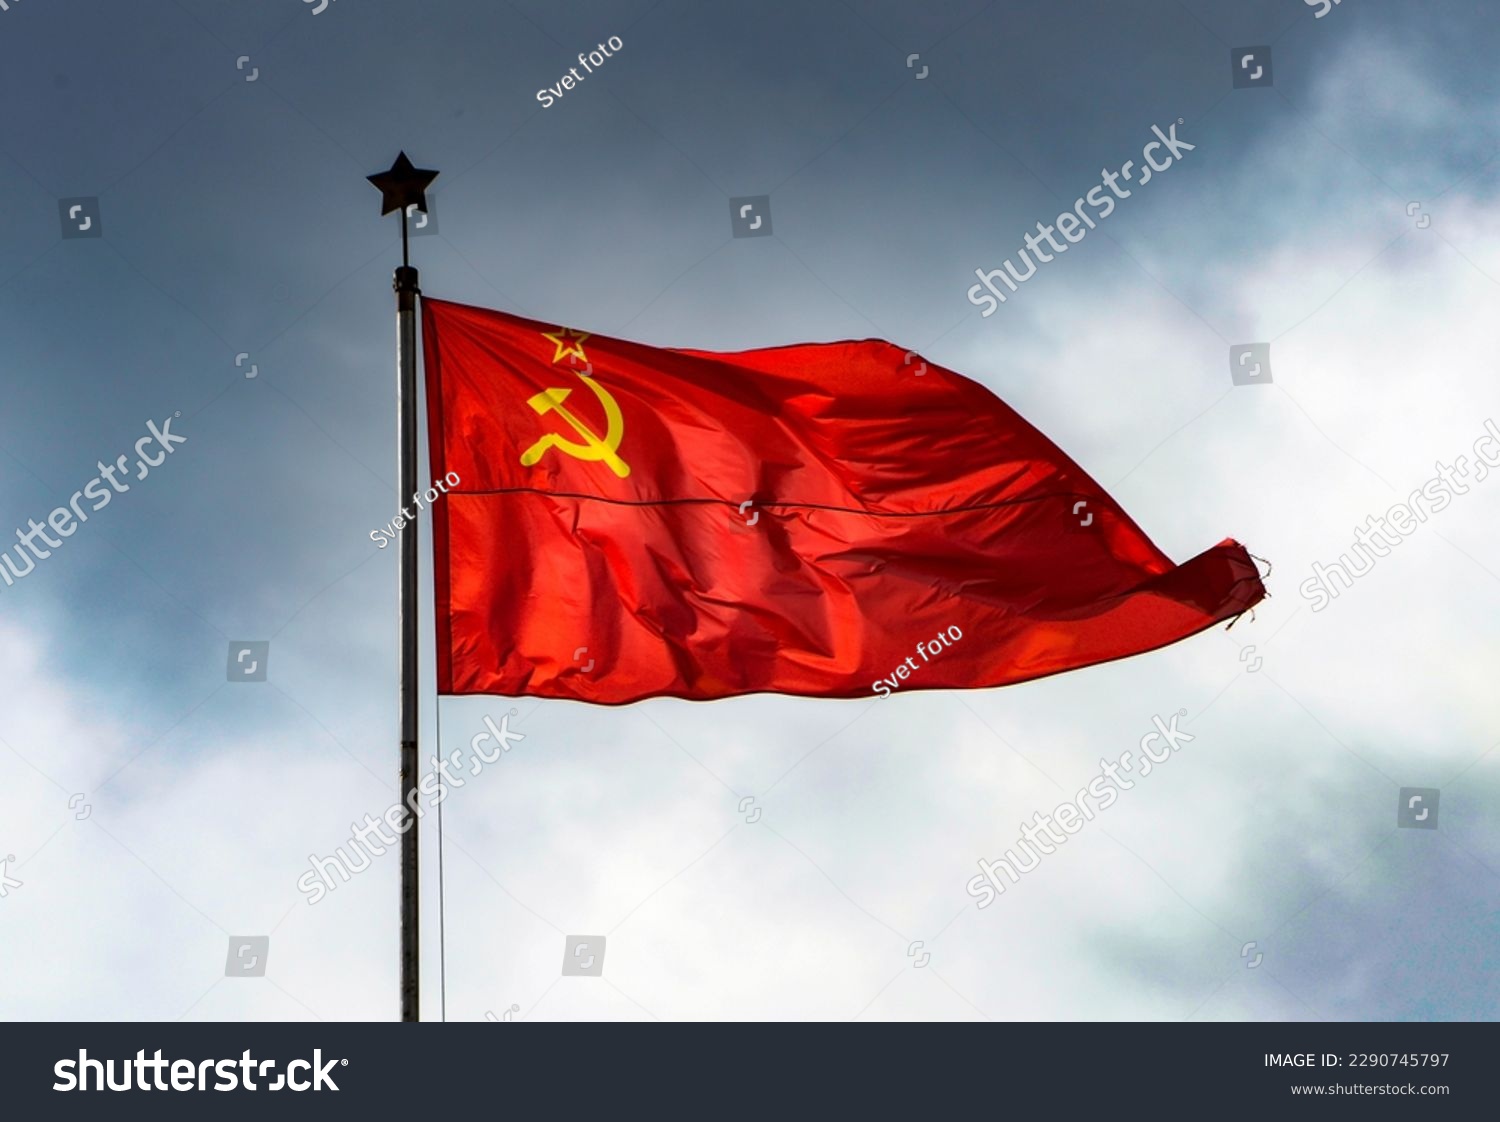 ussr flag. Flag of the Soviet Union. Russia is trying to restore the Soviet Union #2290745797